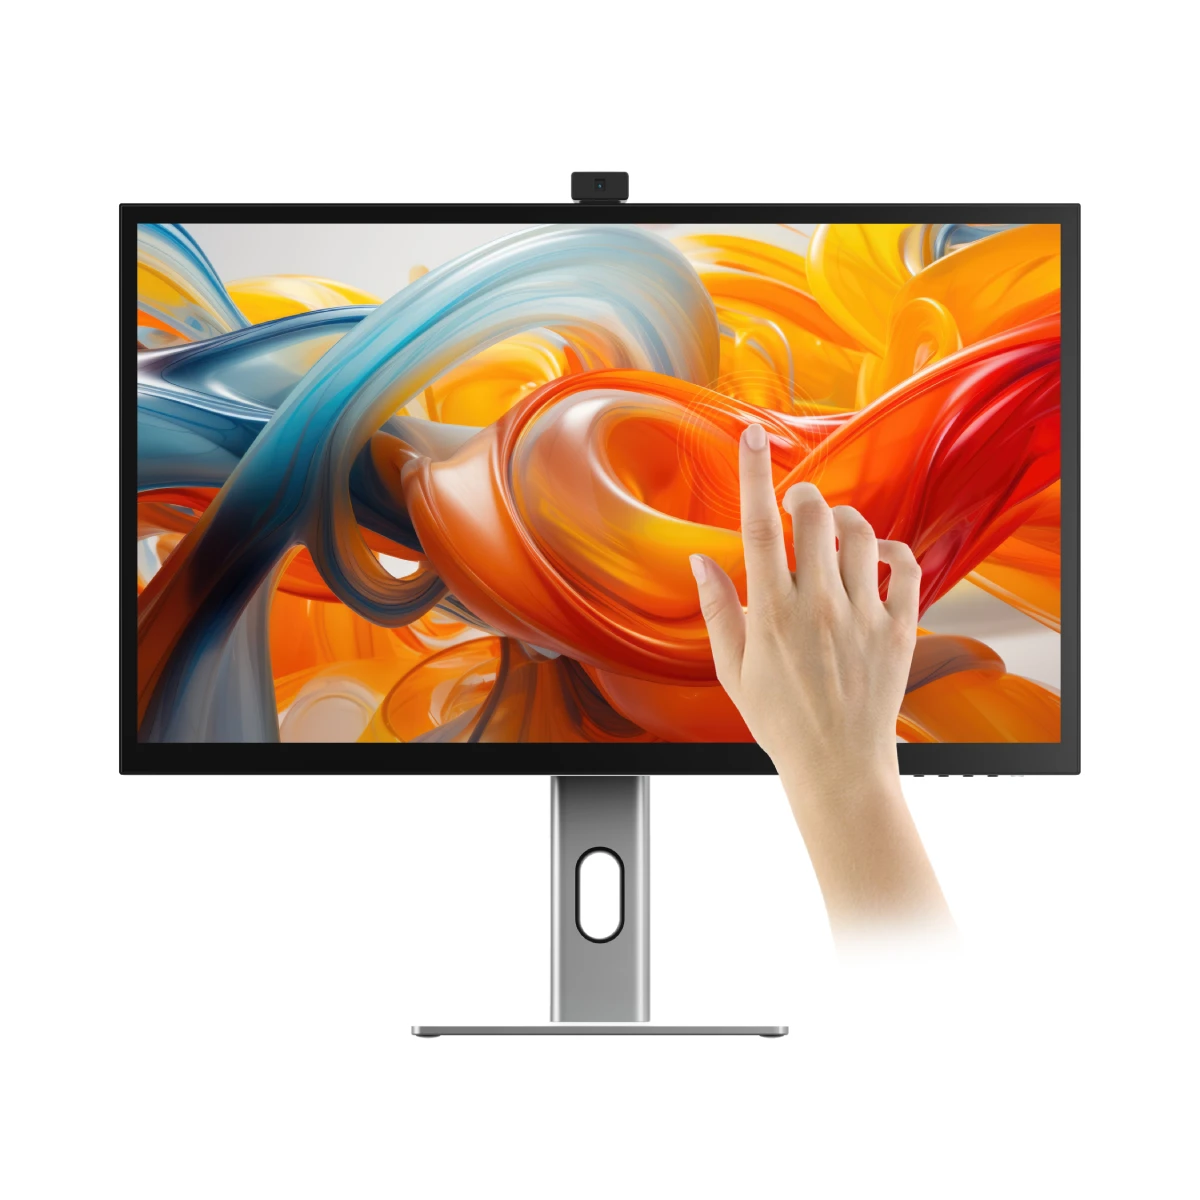 clarity-pro-touch-27-uhd-4k-monitor-with-65w-pd-webcam-and-touchscreen-pack-of-2-dual-4k-universal-docking-station-displayport-edition2